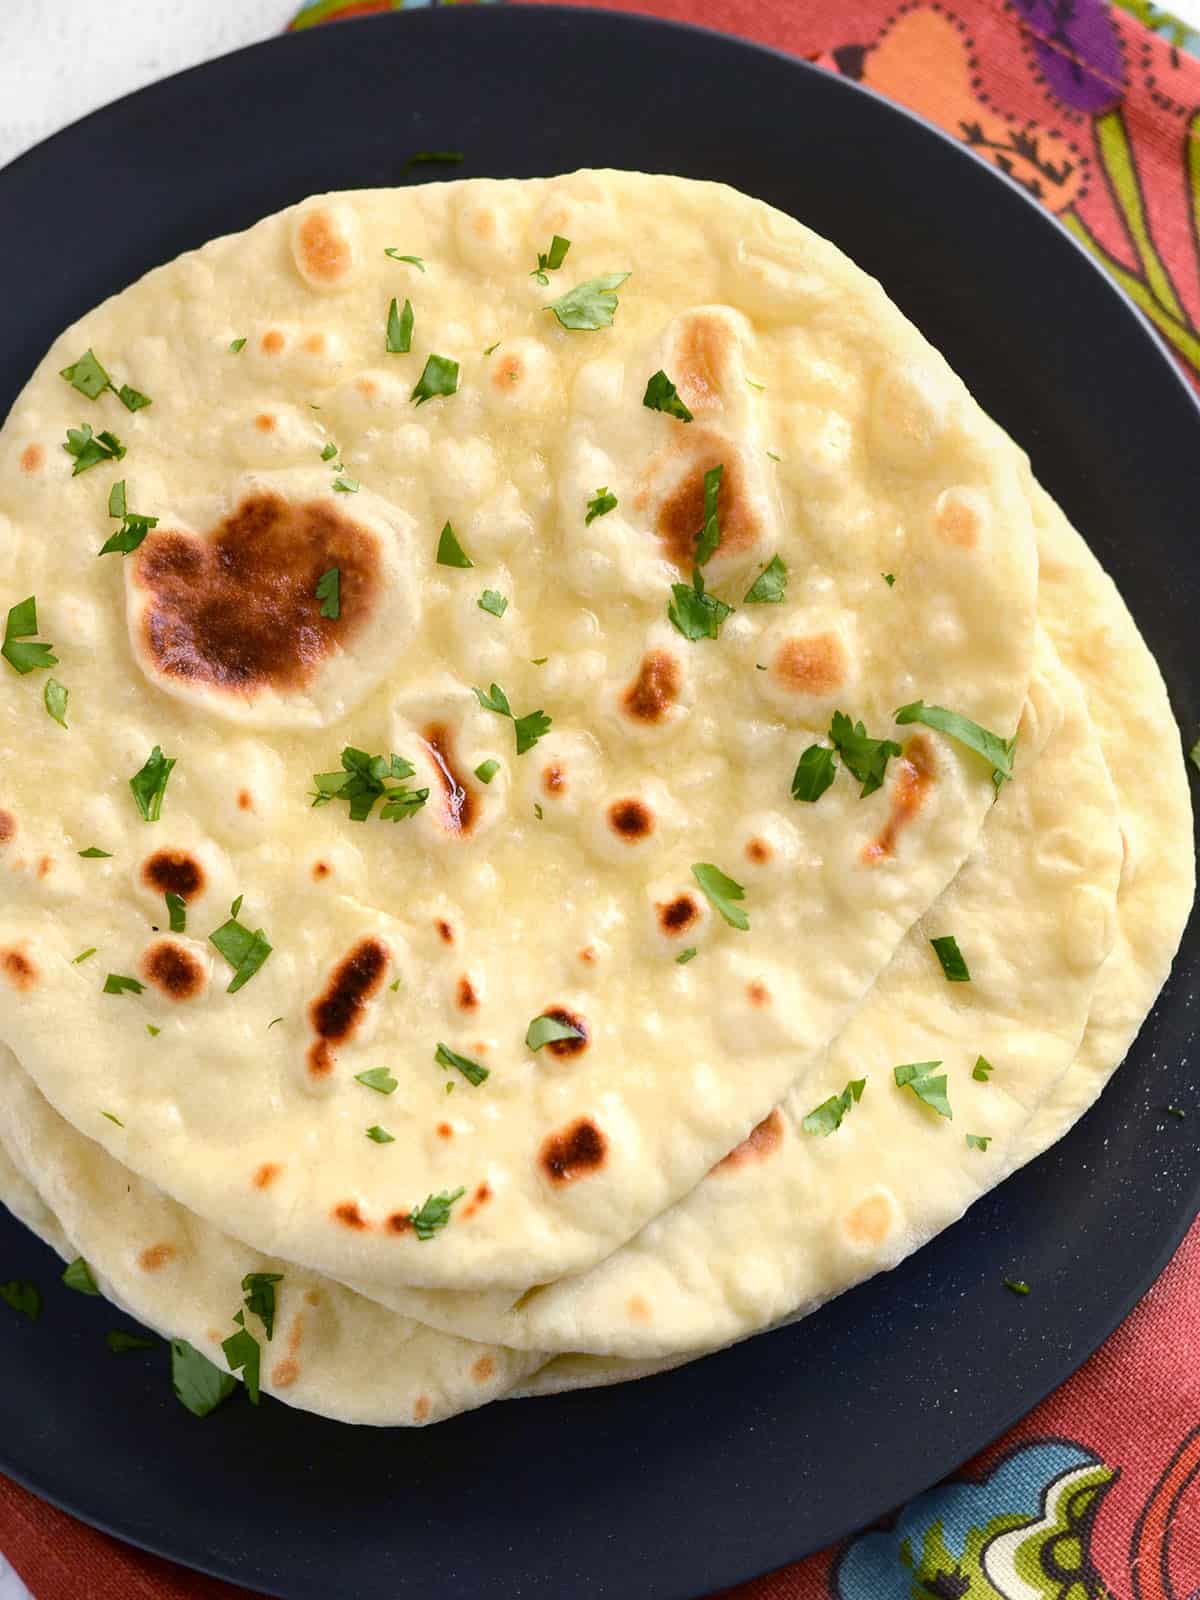 Overhead view of a stack of naan on a plate garnished with parsley.